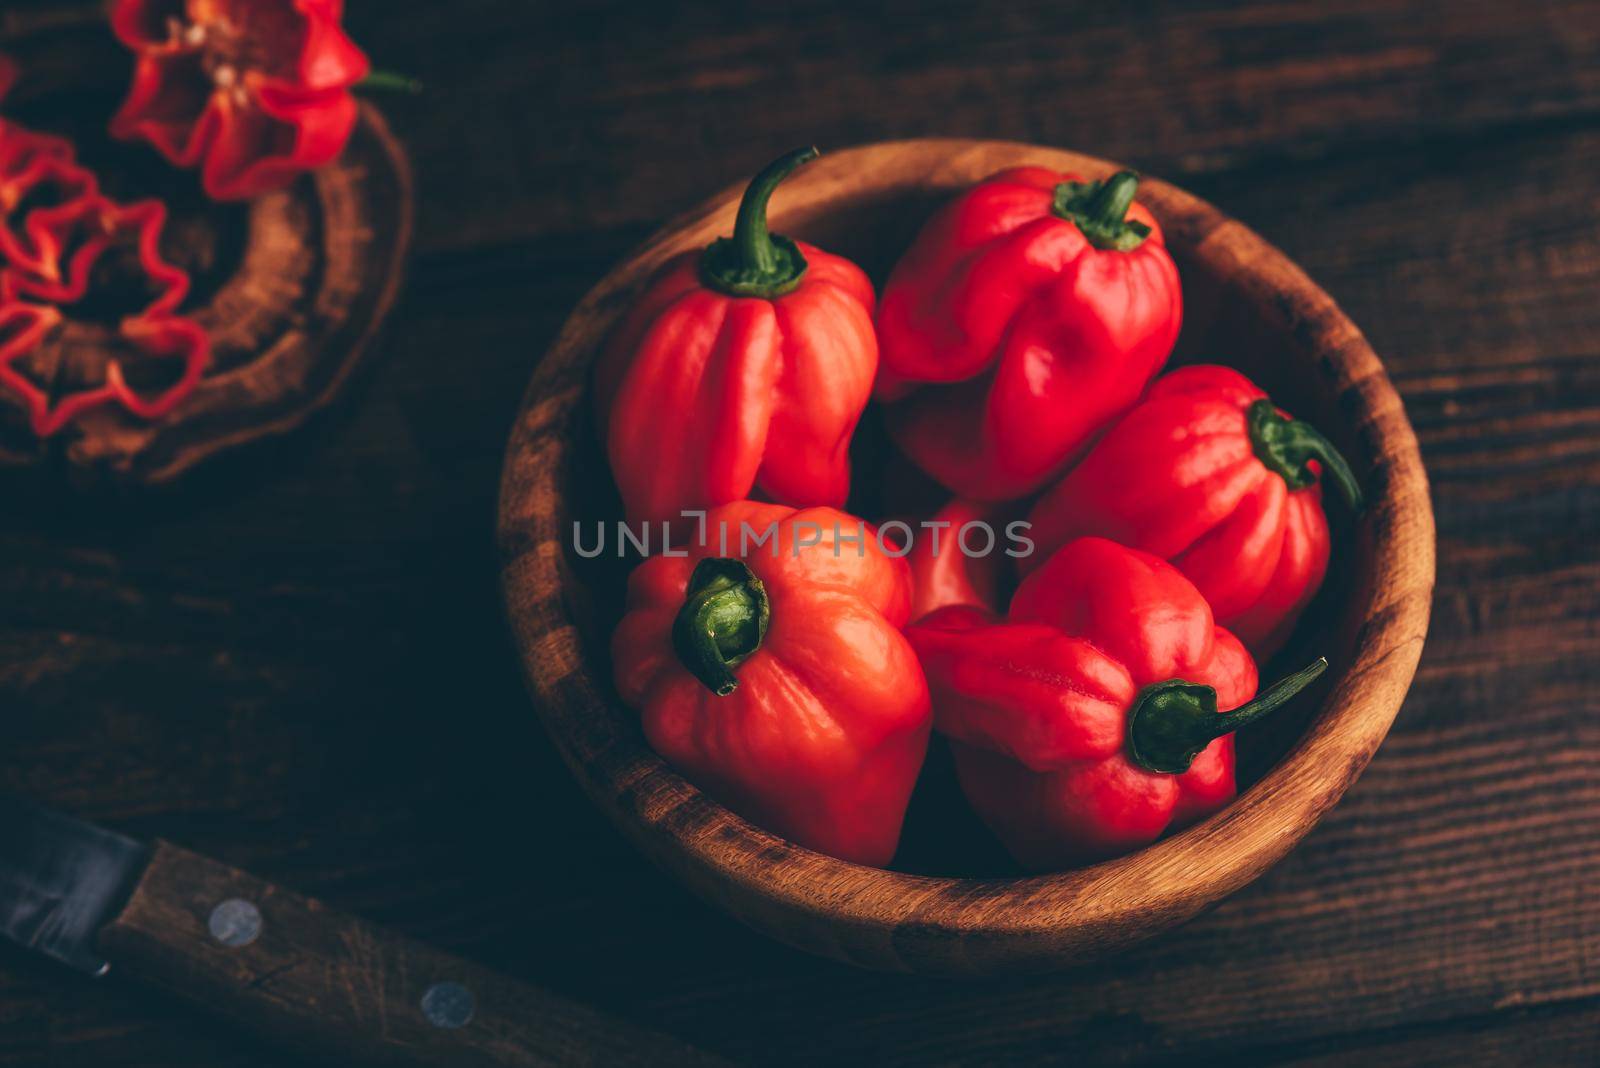 Red Habanero Chili Peppers in a Wooden Bowl by Seva_blsv